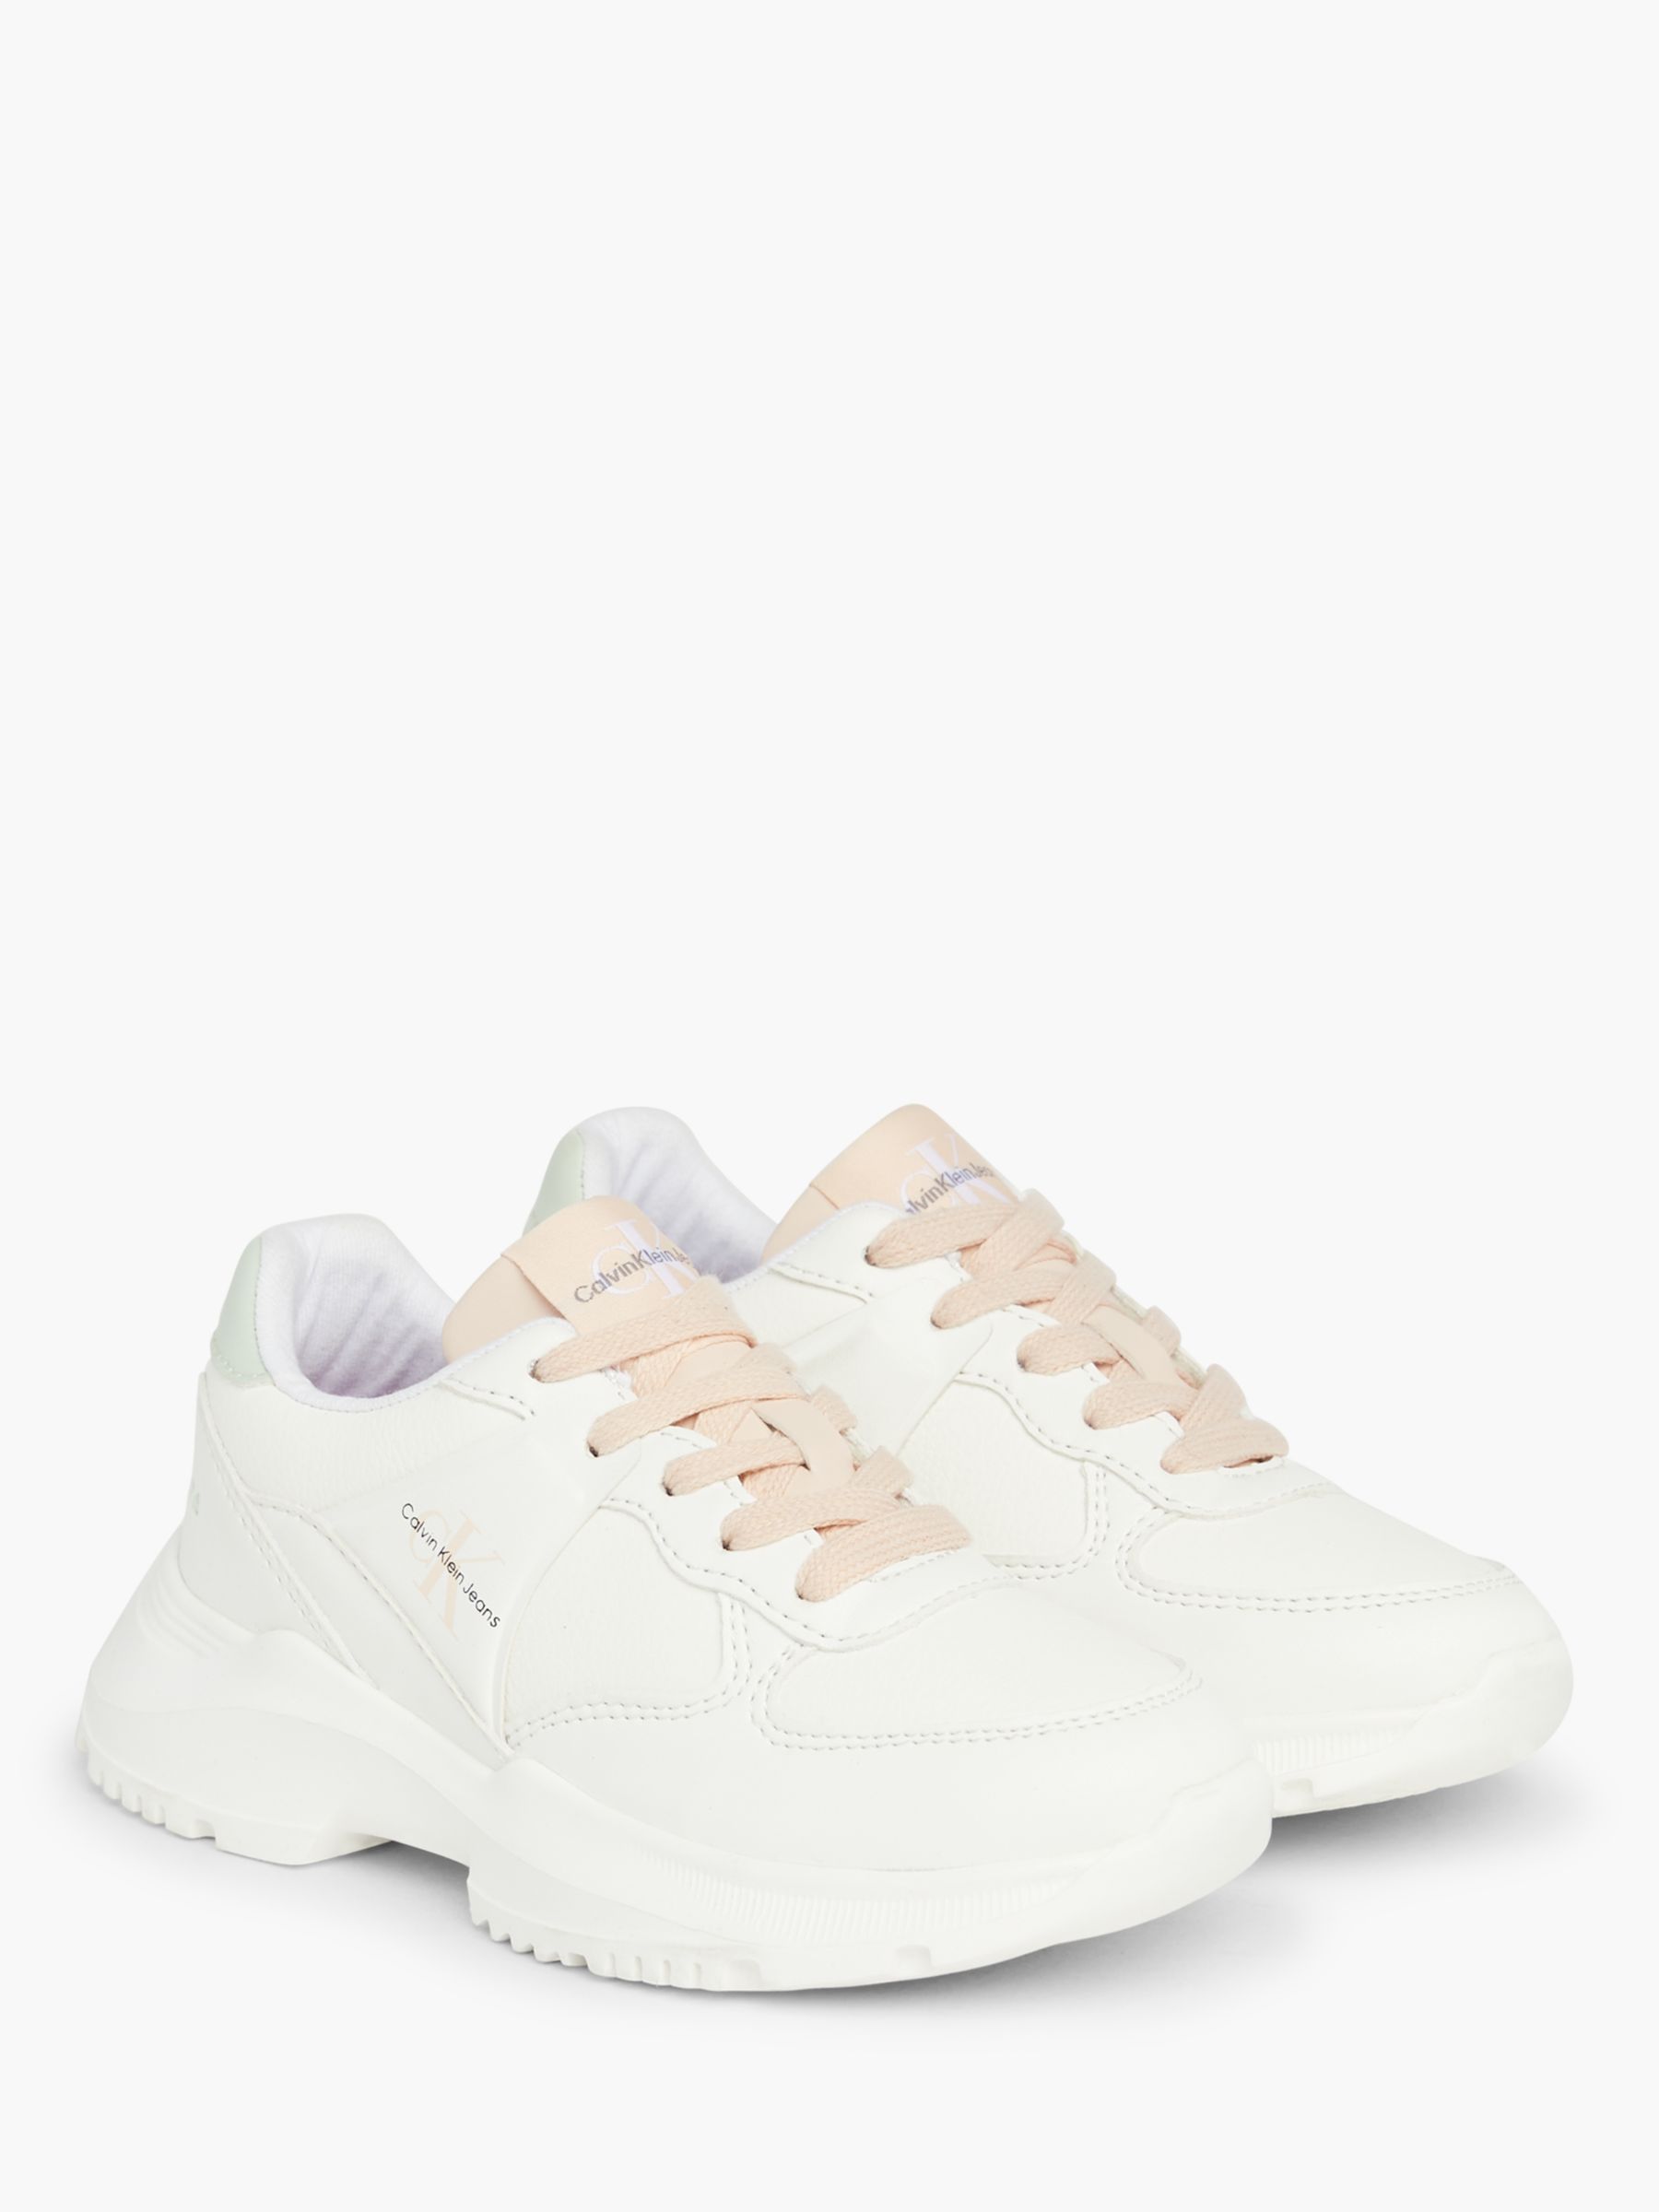 Buy Calvin Klein Kids' CKJ Low Lace-Up Trainers, Off White/Green Online at johnlewis.com